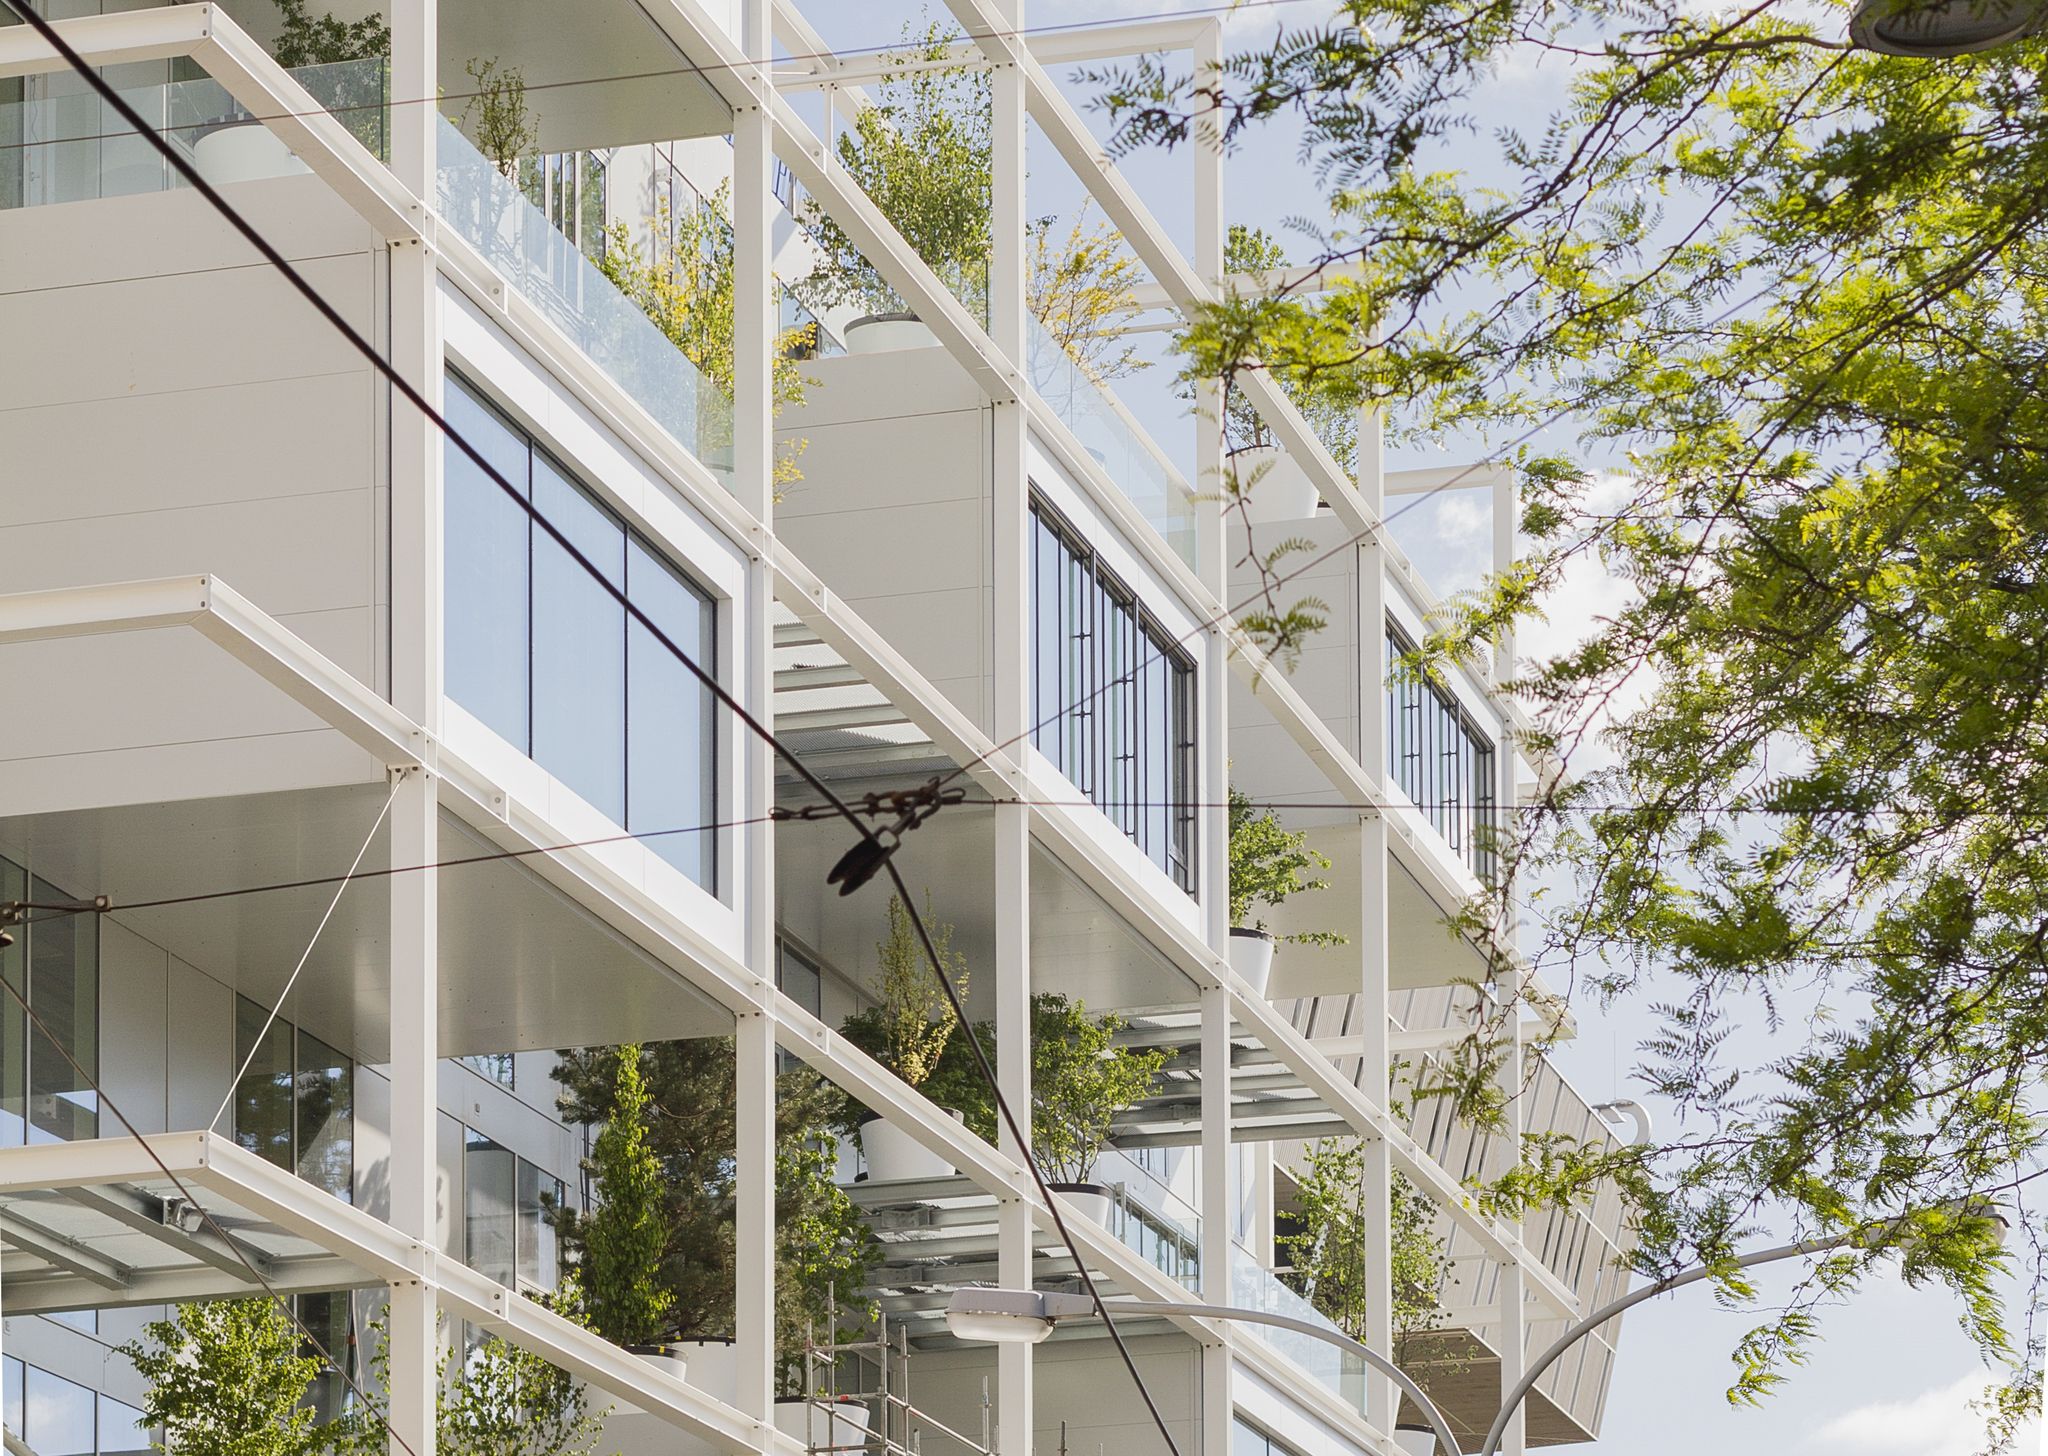 the façade had an aim to providing coolness to the outlet while helping the climate in Vienna remain stable